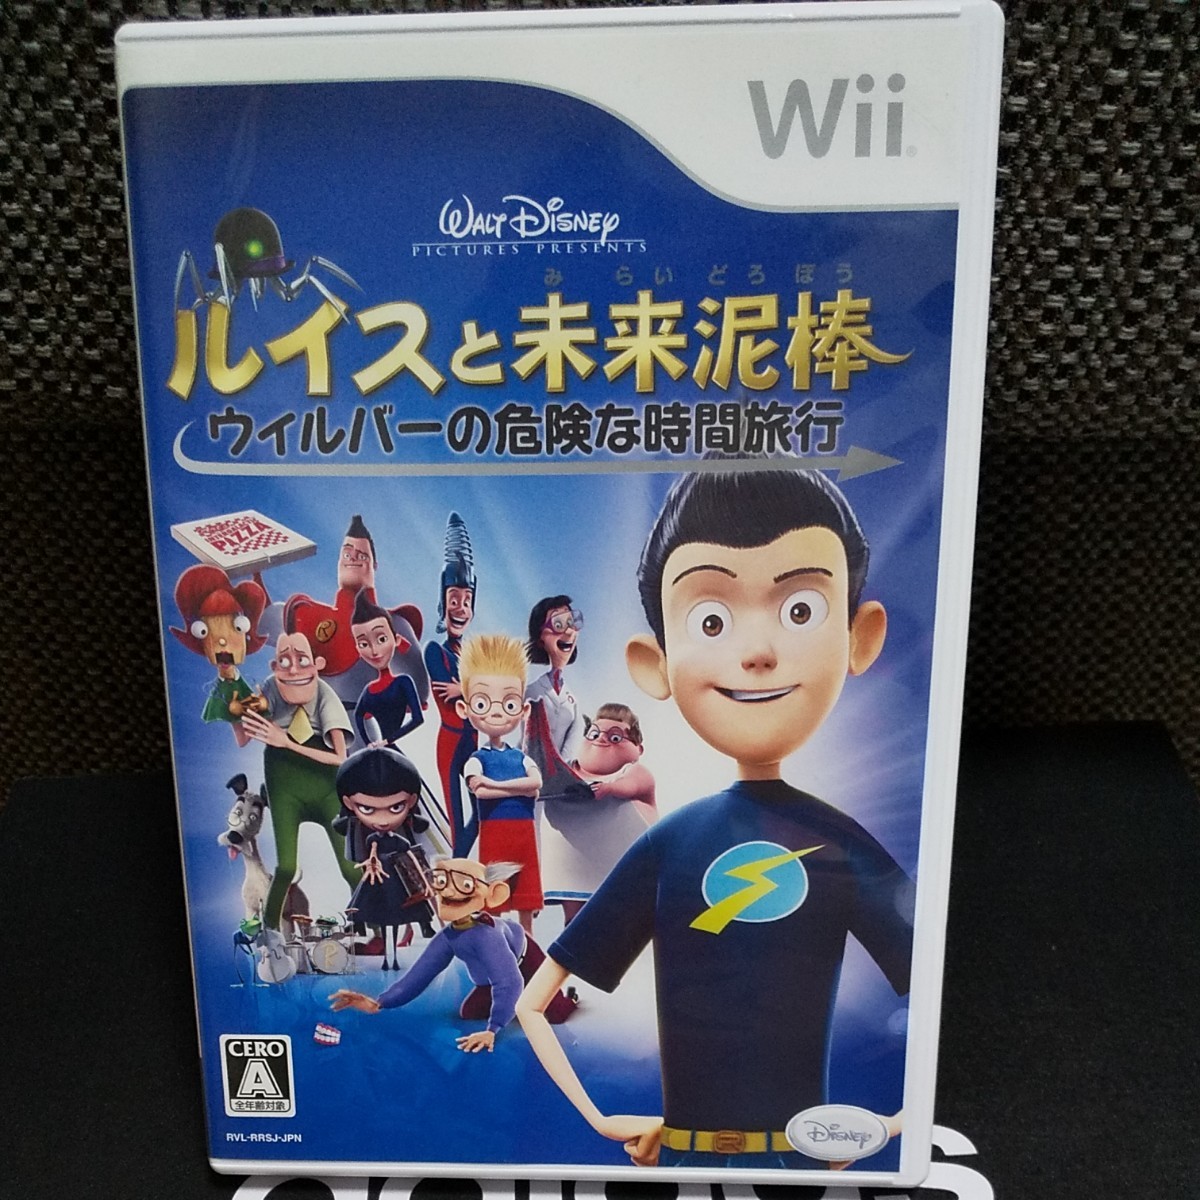 【Wii】 ルイスと未来泥棒 ～ウィルバーの危険な時間旅行 Wii